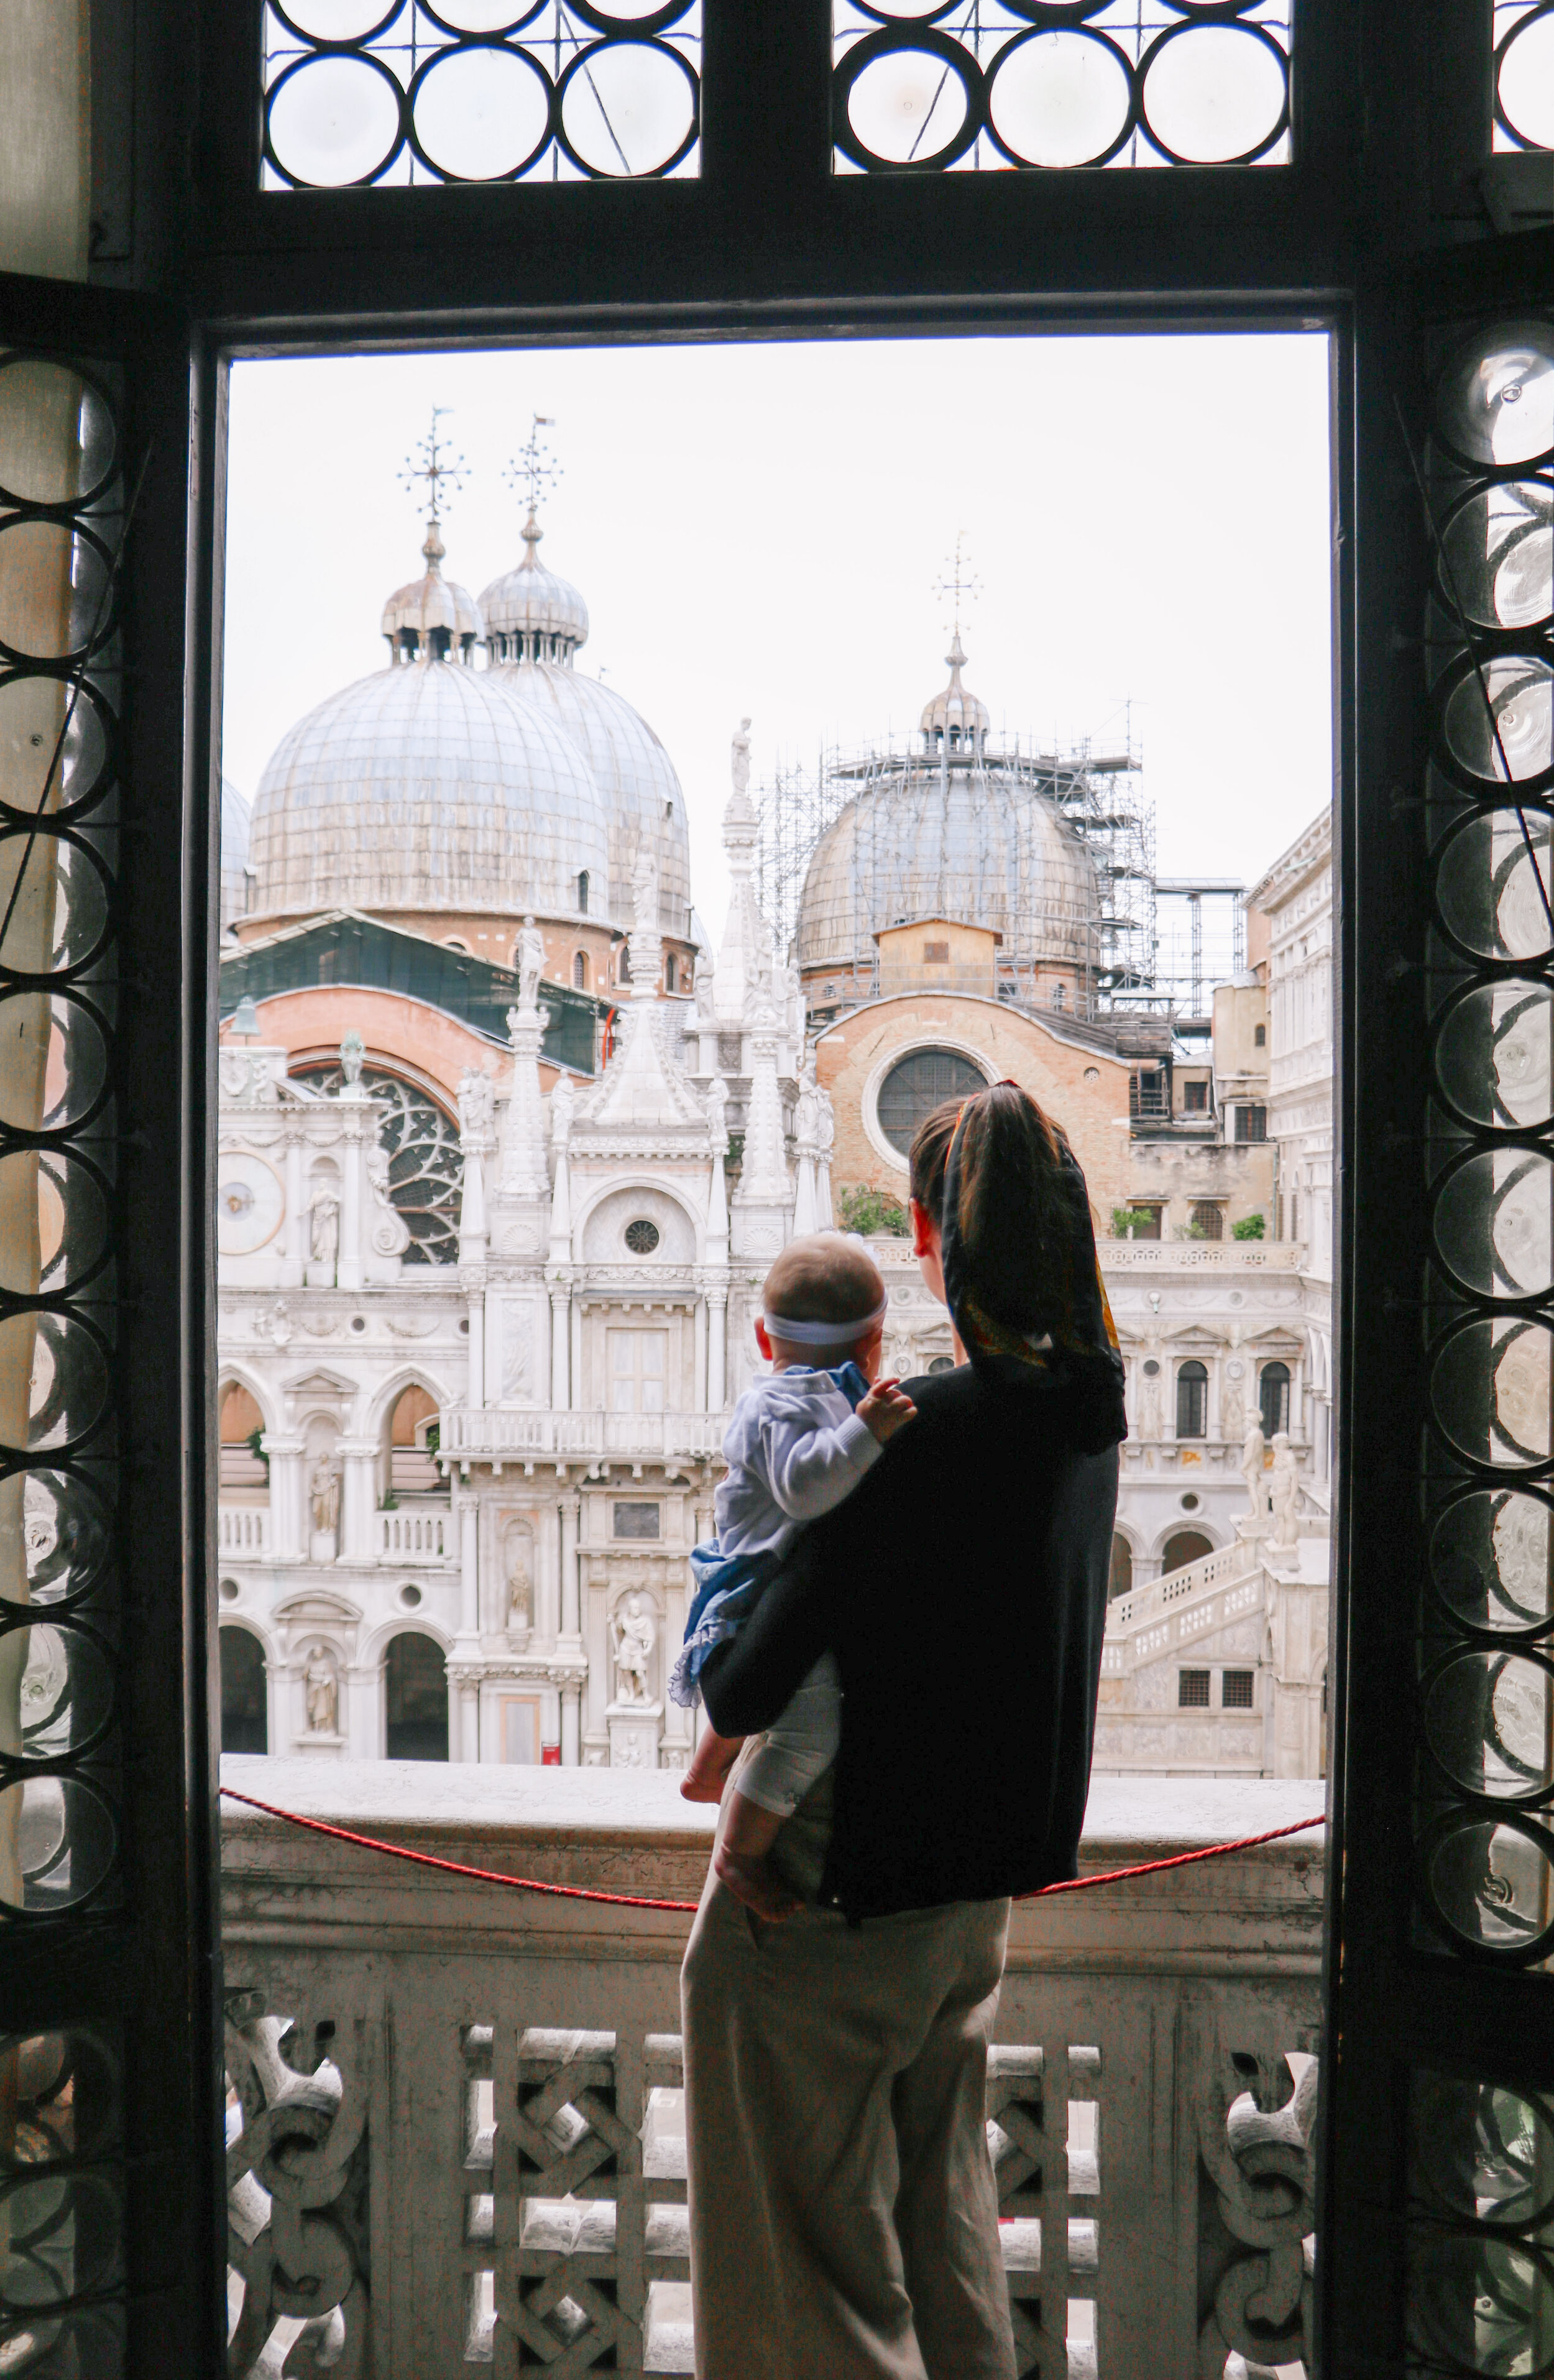 Top Tips For Traveling With A Baby Under One